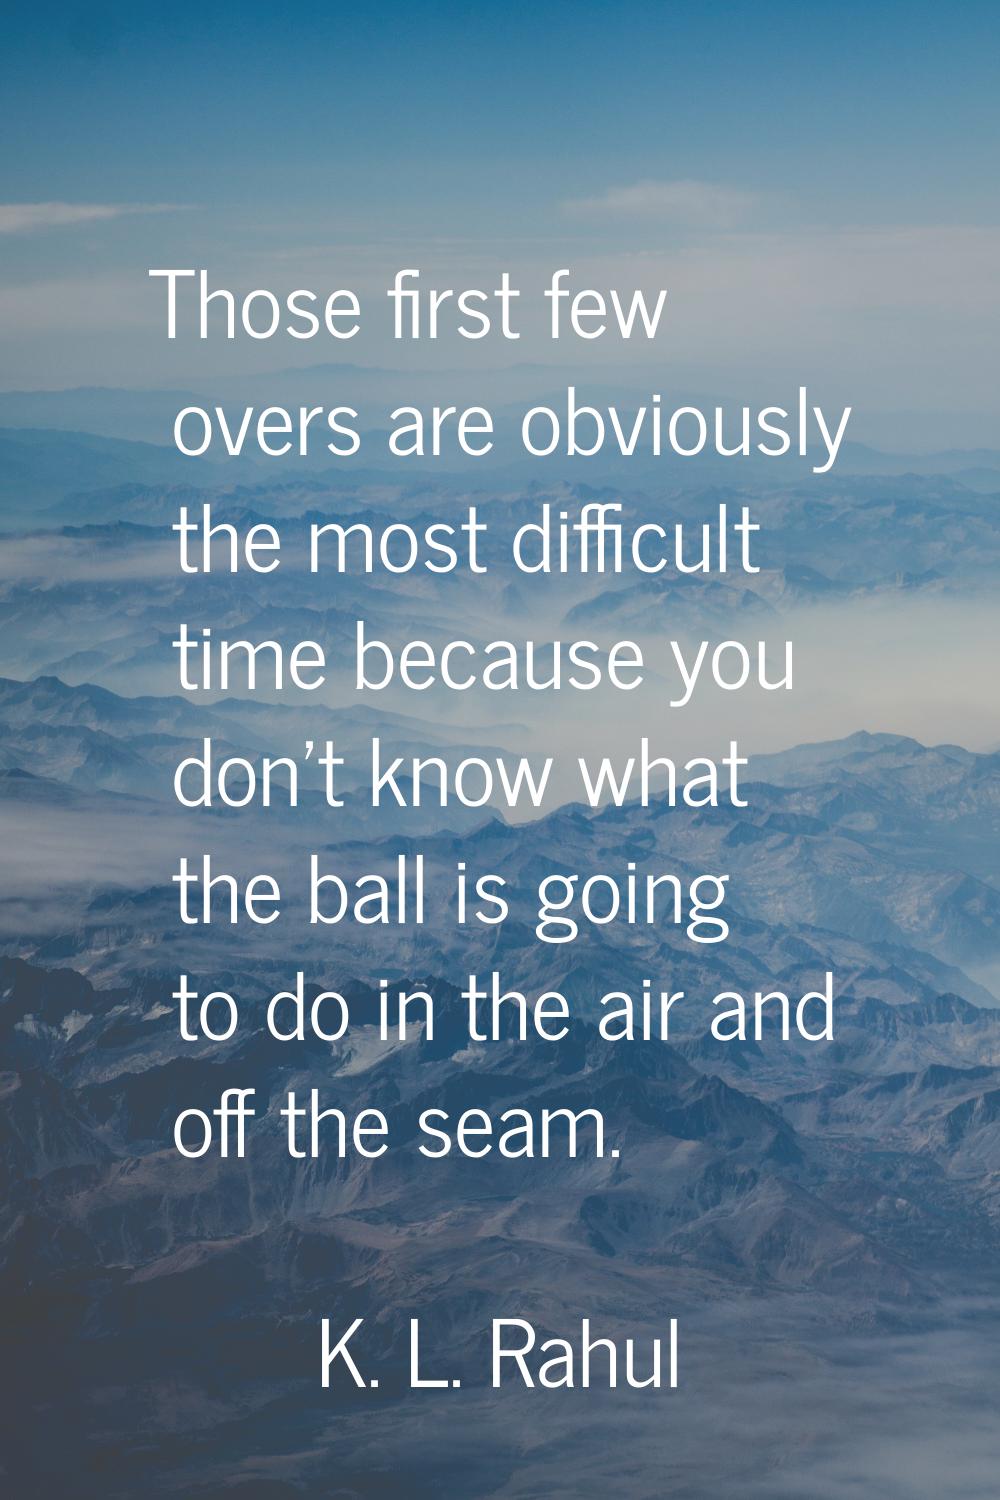 Those first few overs are obviously the most difficult time because you don't know what the ball is